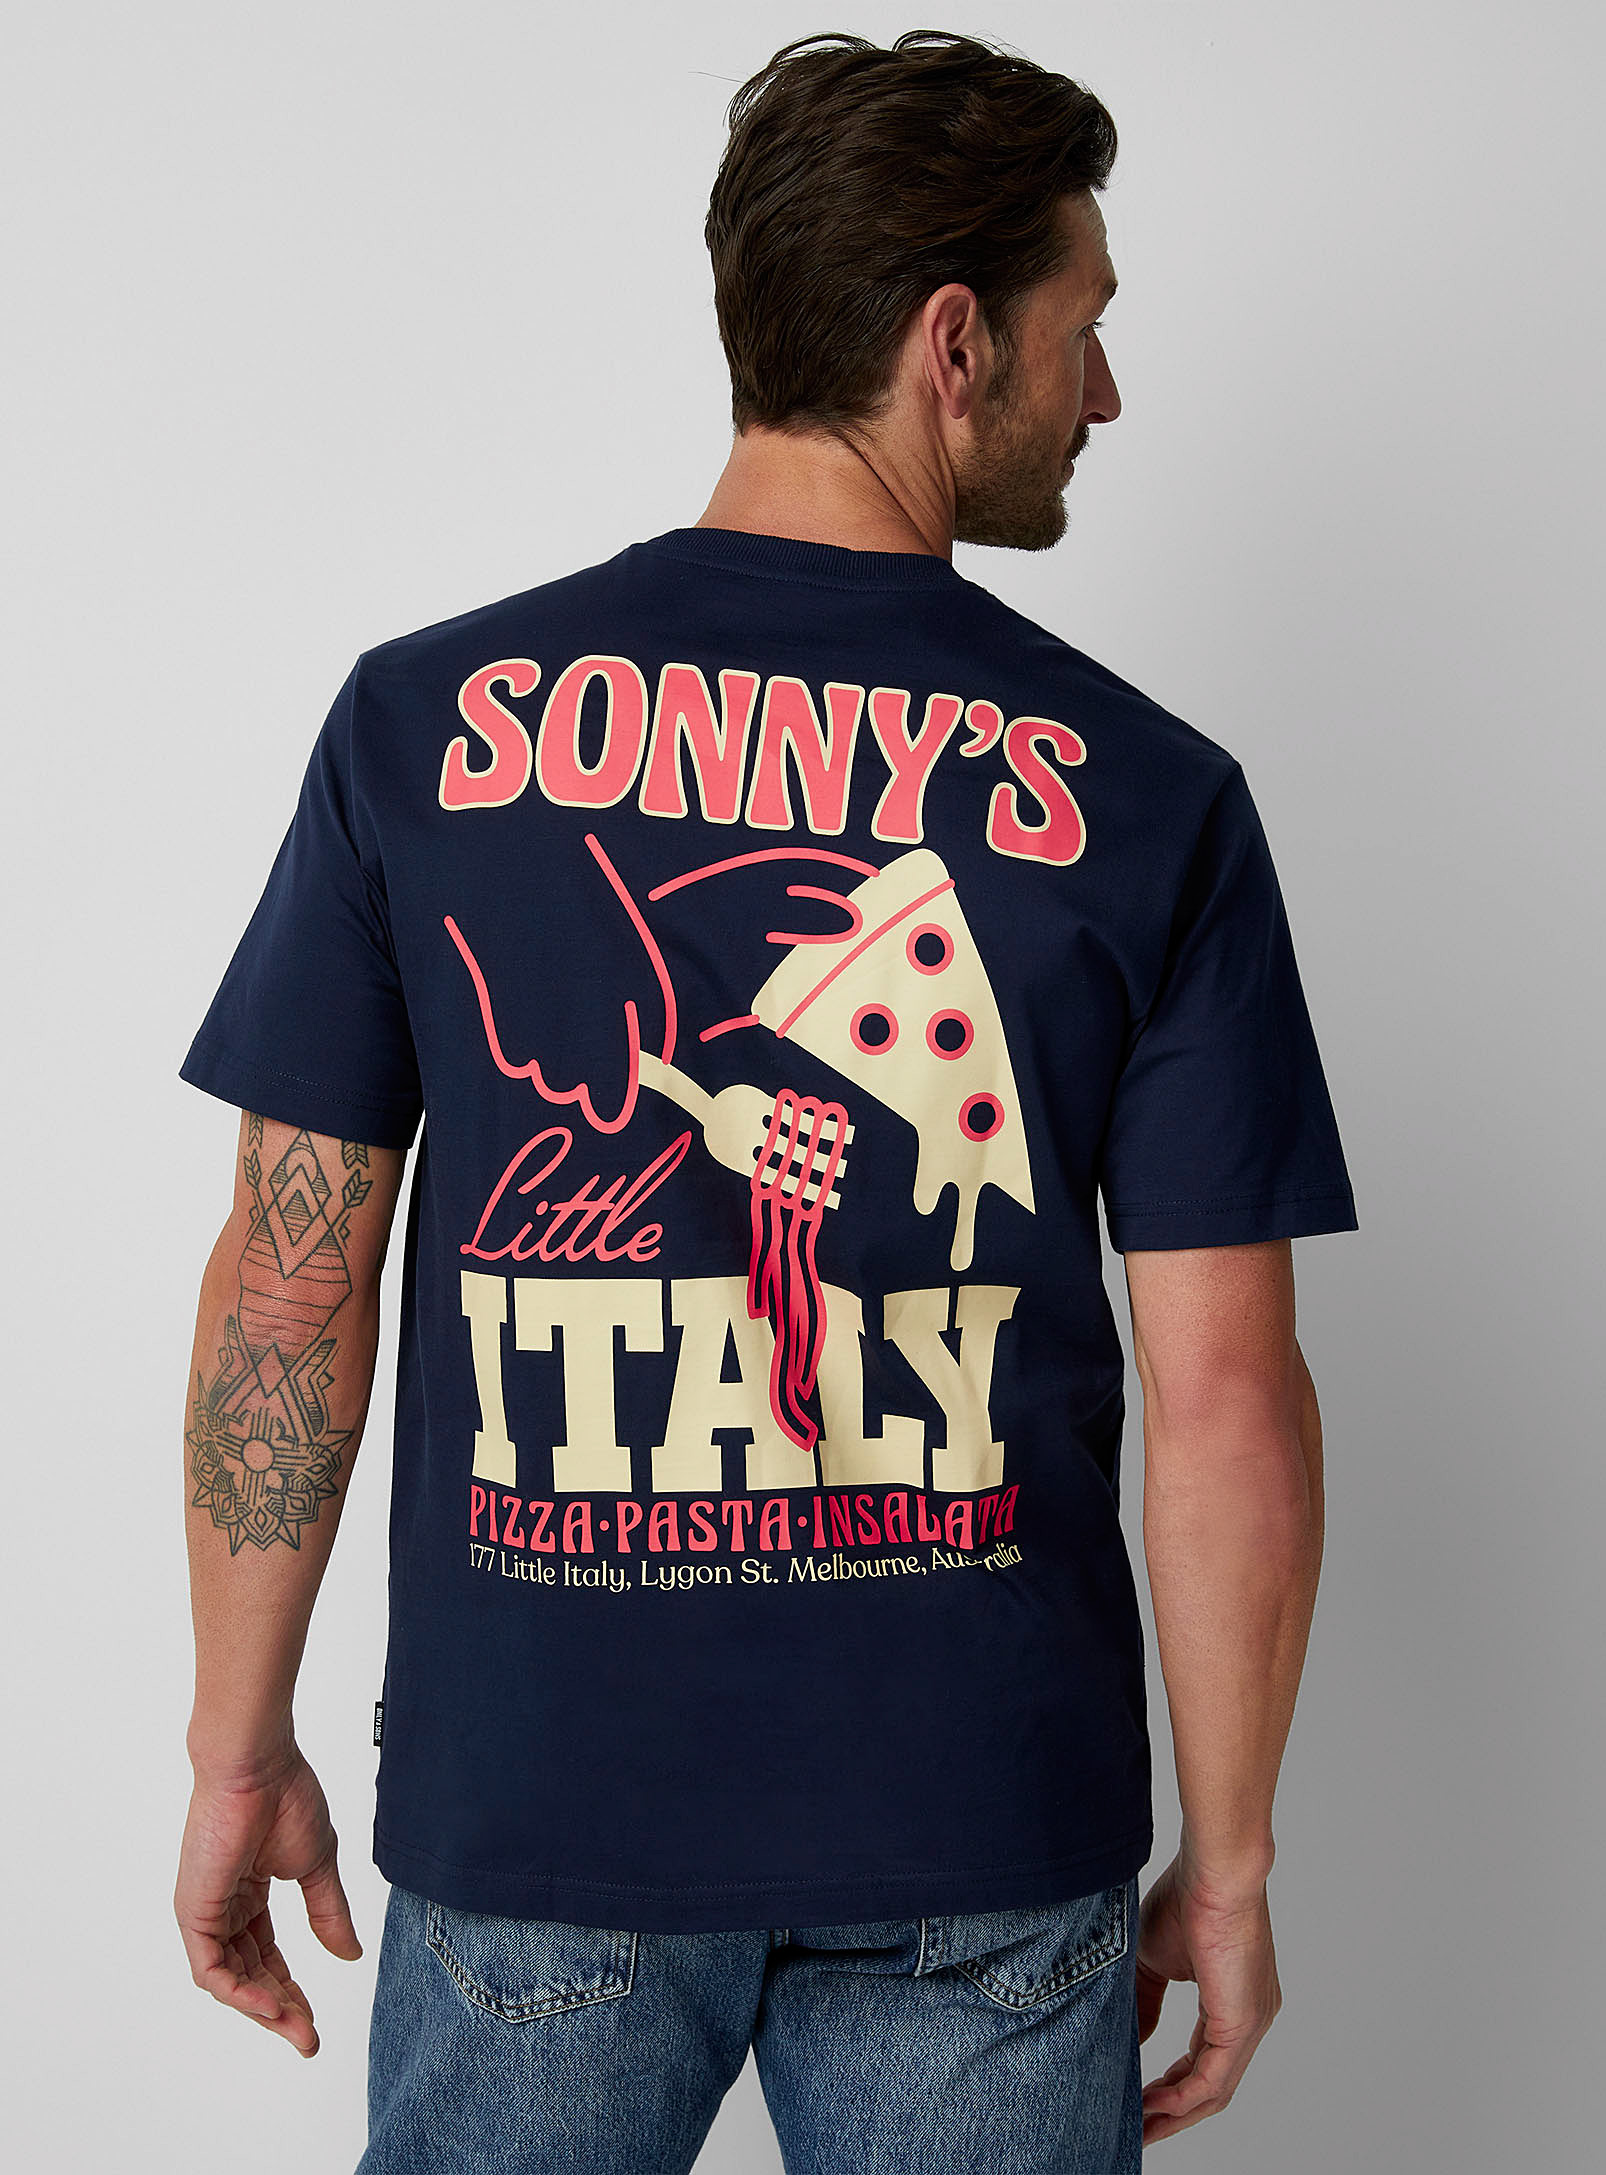 Only & Sons - Le t-shirt petite Italie